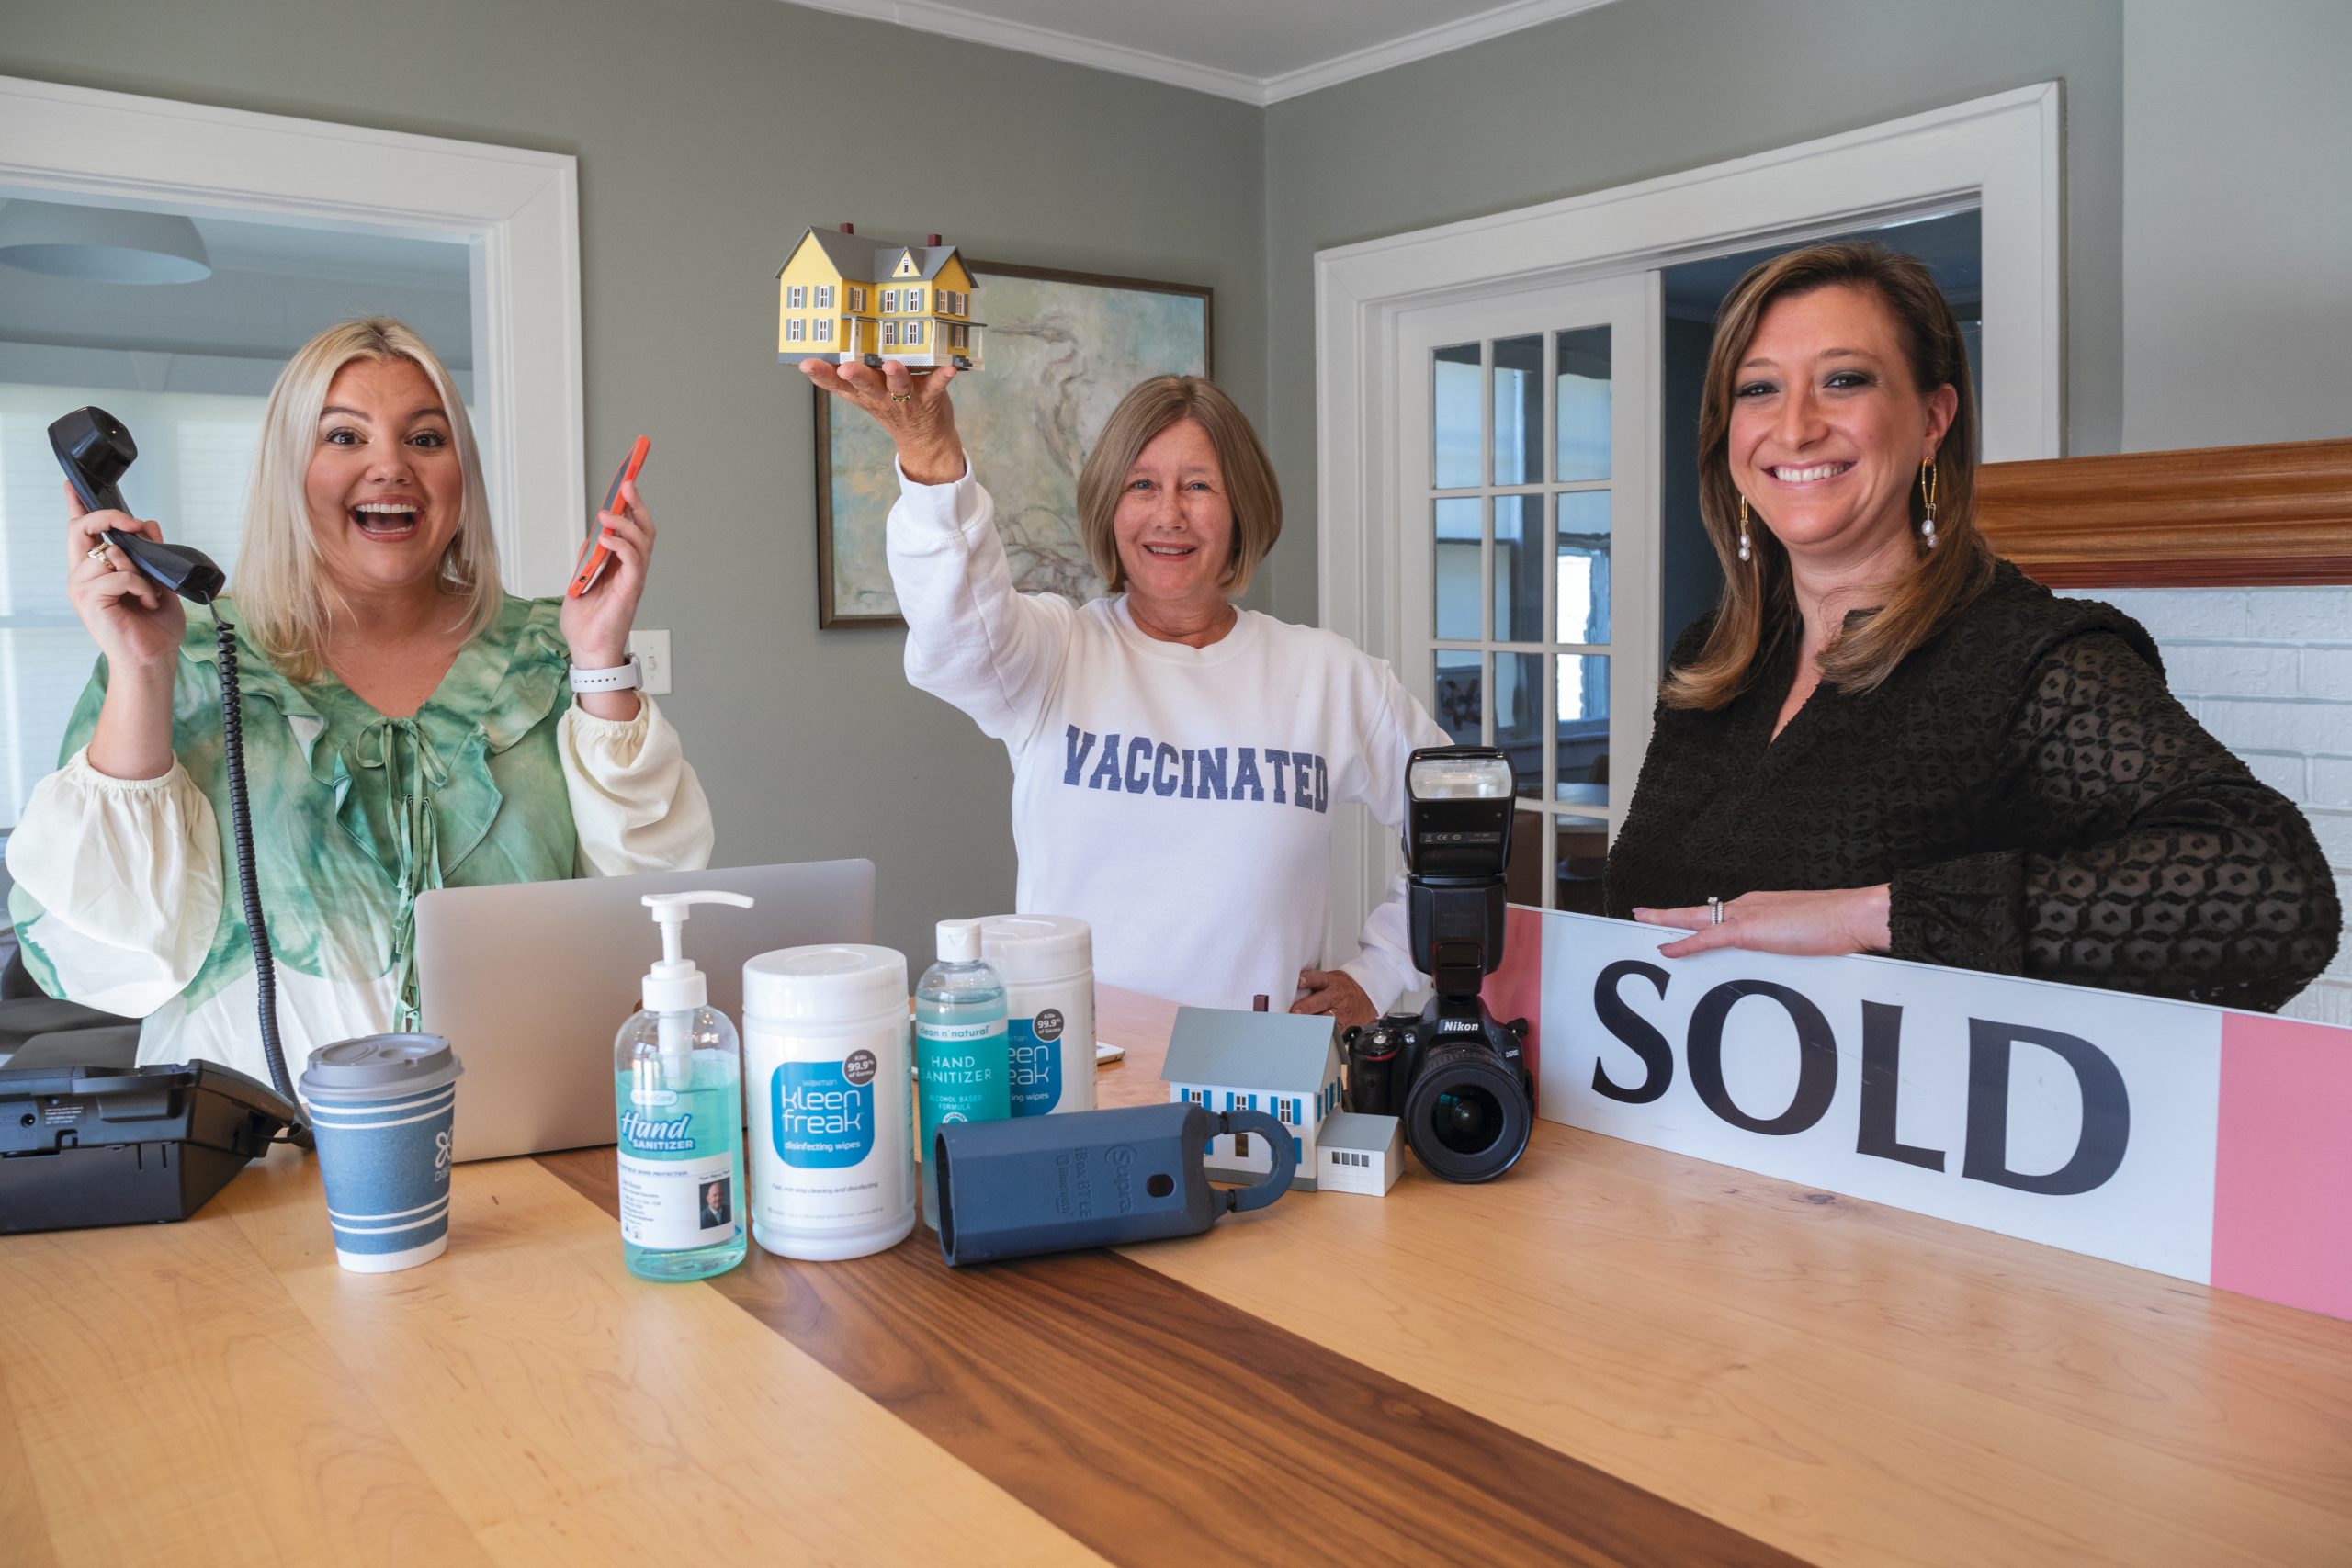 Home Advantage Realty celebrates winning Best Residential Real Estate Agency, with owner Jill Moylan winning Best Real Estate Agent. With more than 30 years of service and 79 agents in Columbia, they are on top of the market! Mary Beth O’Cain, Jill Moylan, Lyndsey Glymph.